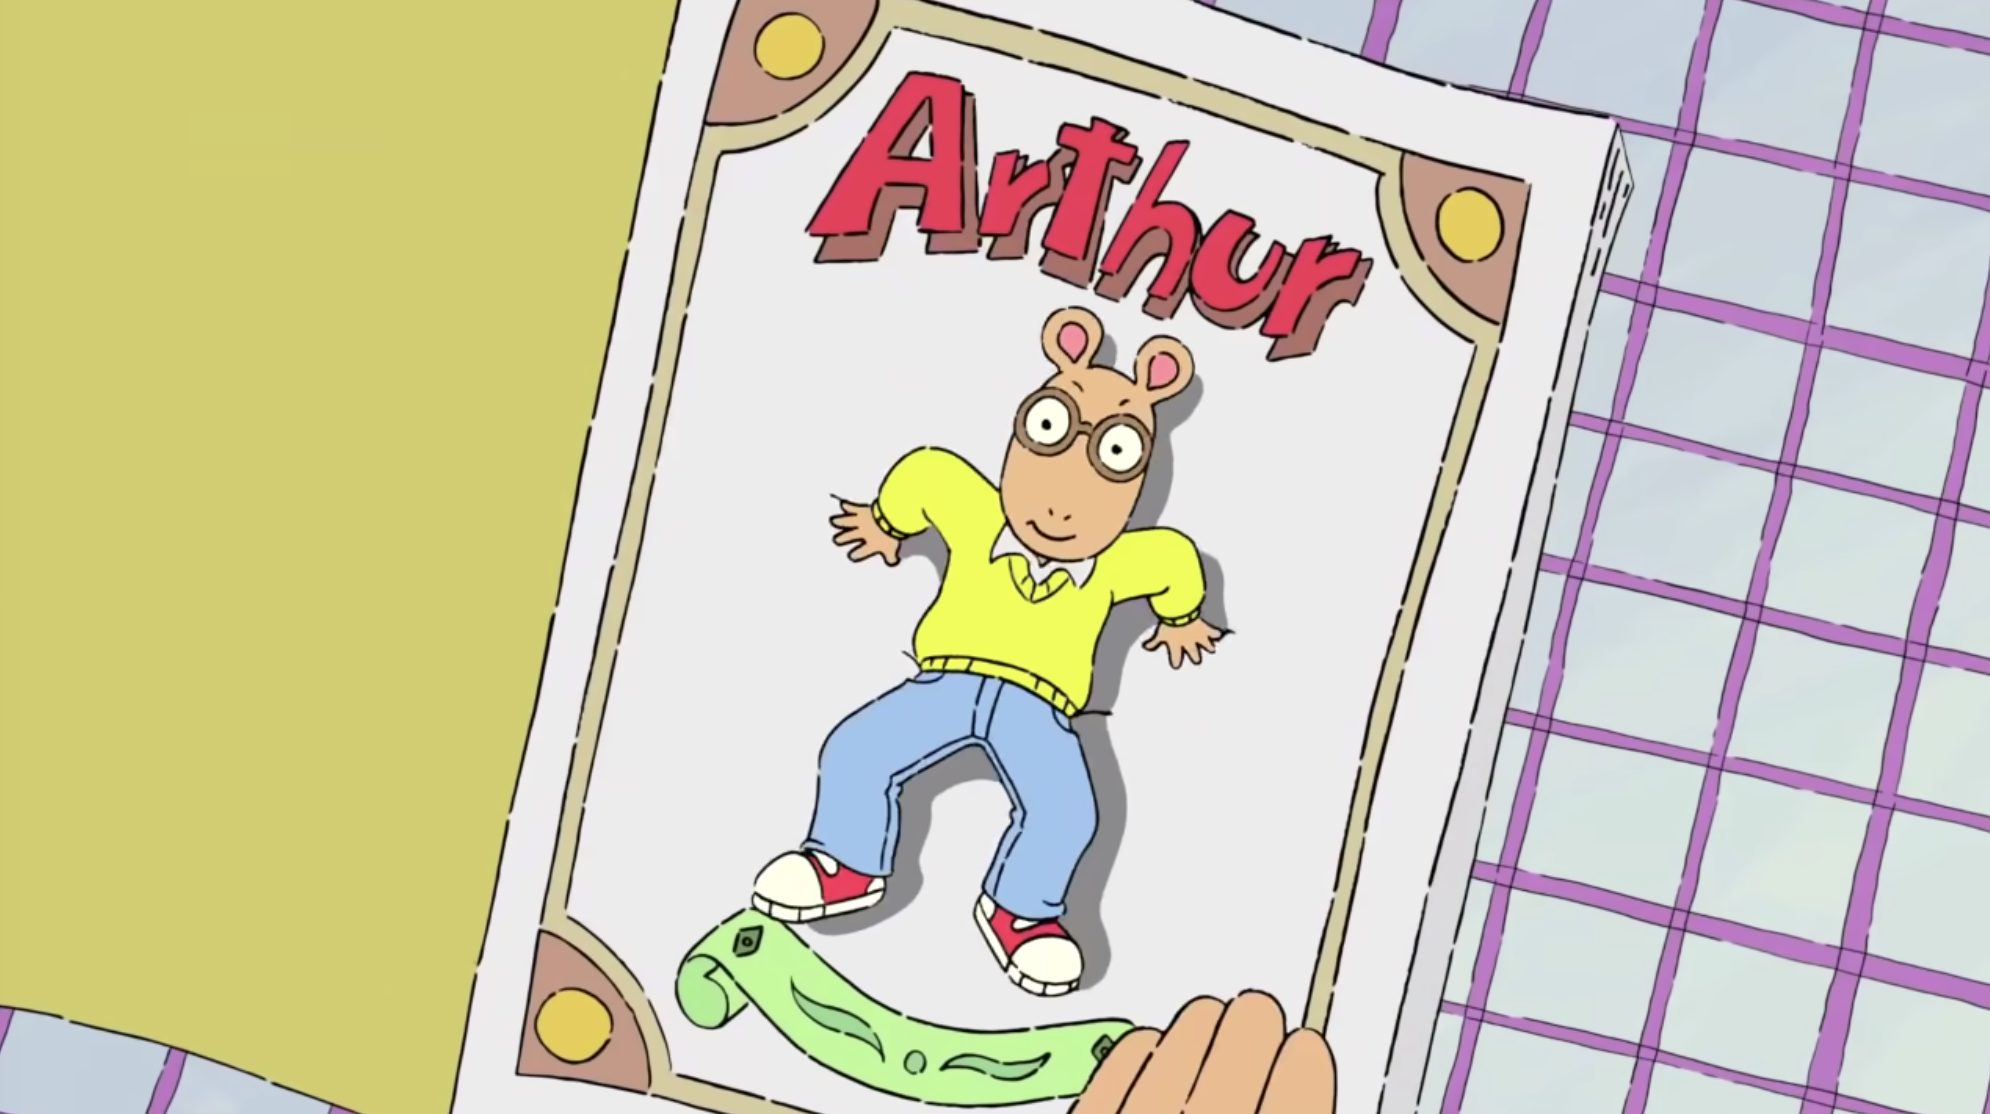 &quot;Arthur&quot; title card — which is the title on a page in a book featuring the titular character. 